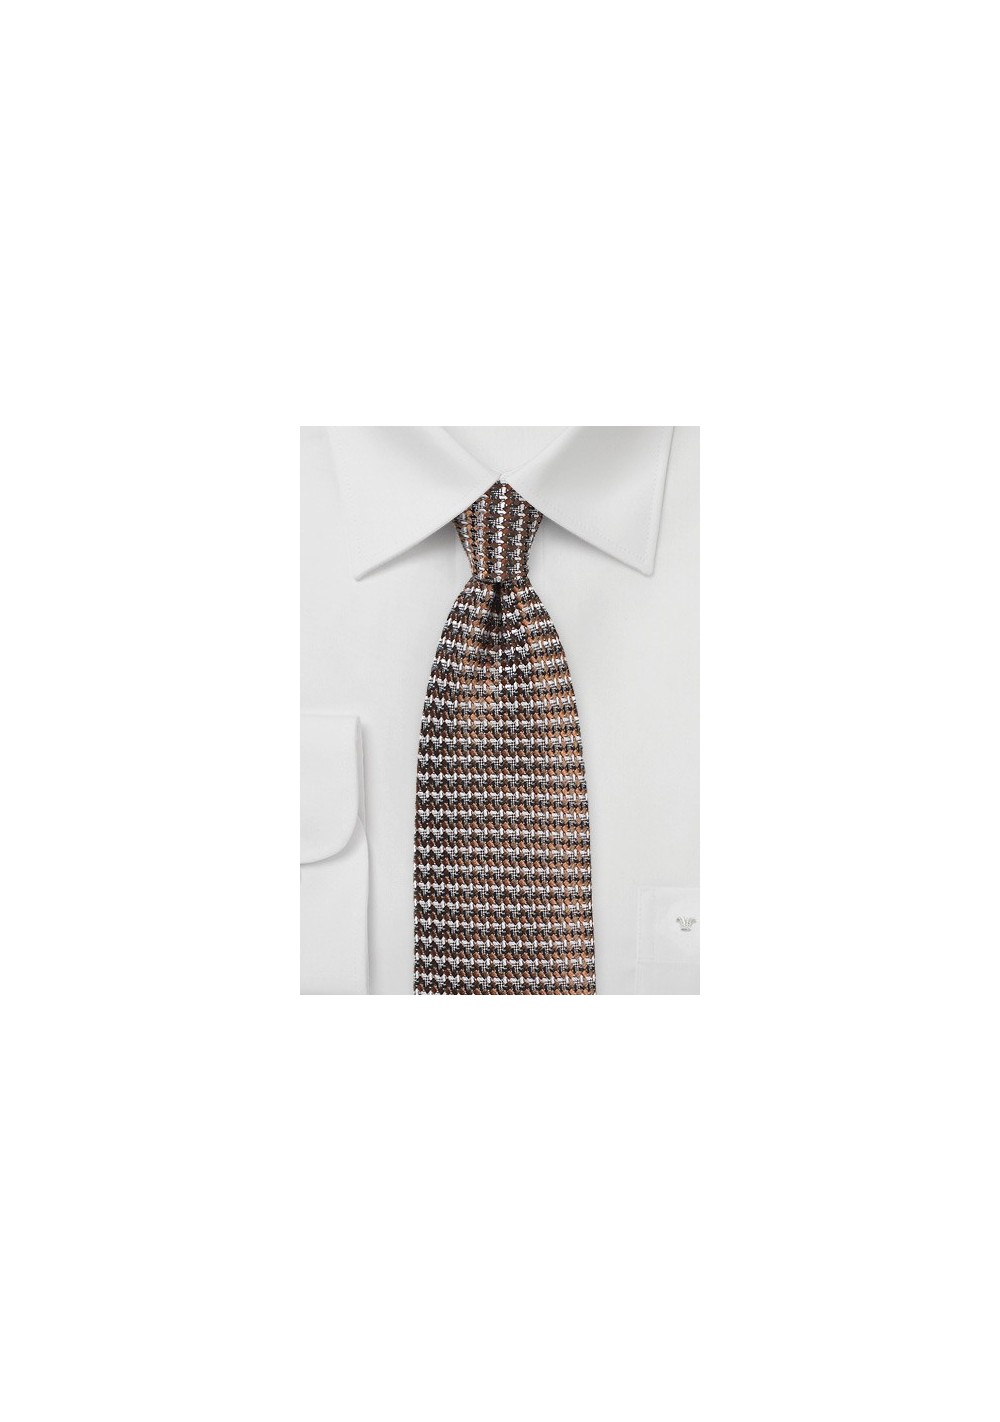 Retro Weave Necktie in Brown and Gray